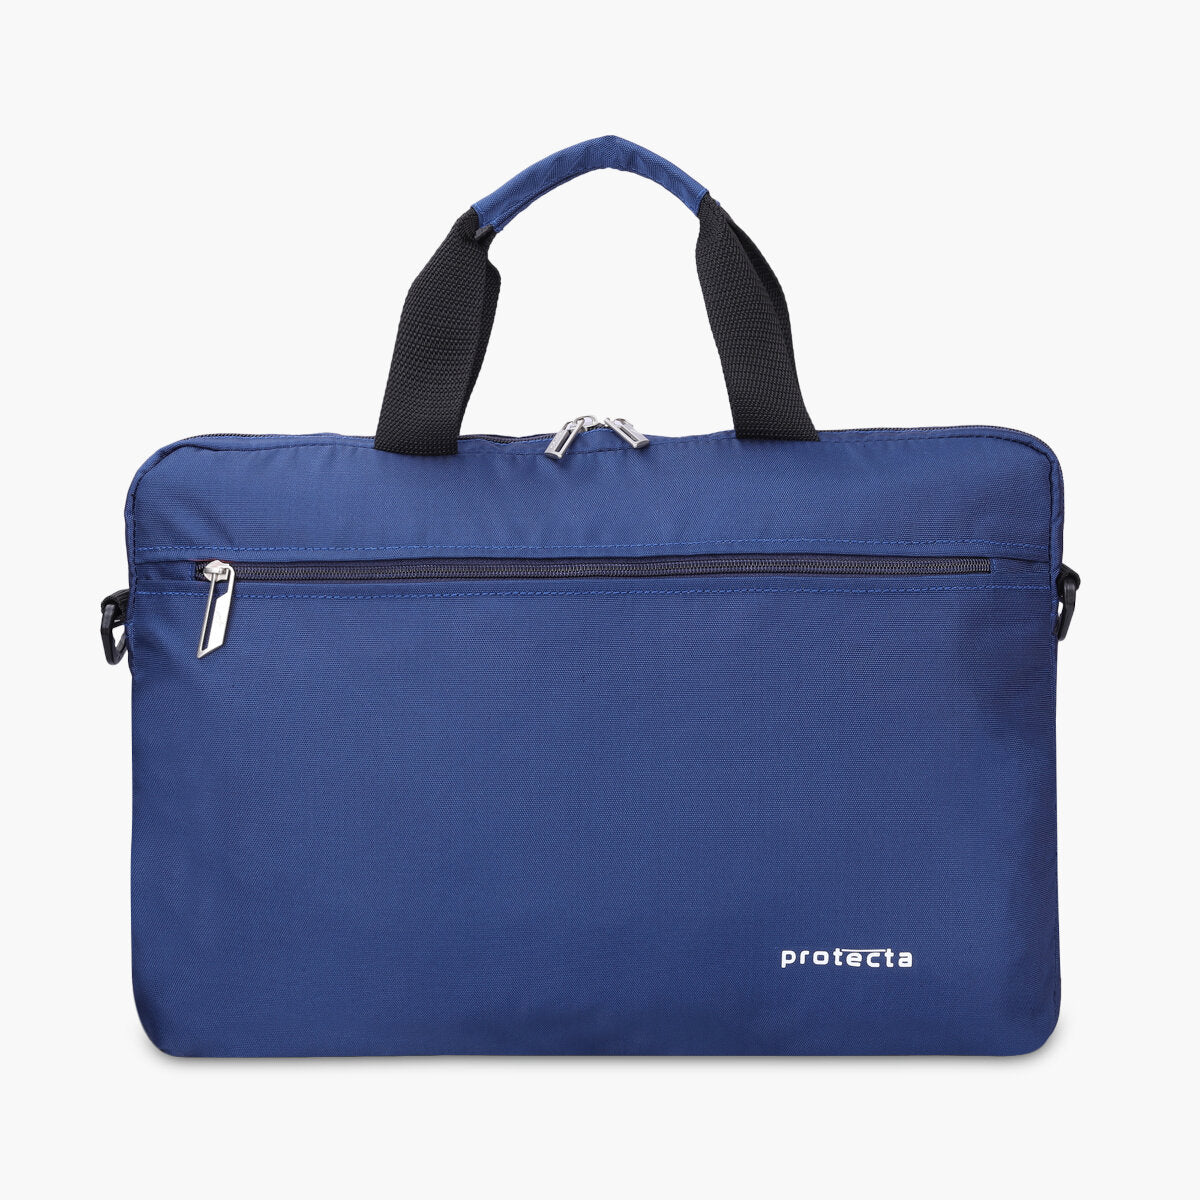 Navy | Protecta Staunch Ally Lite Slim Office Laptop Bag-Main